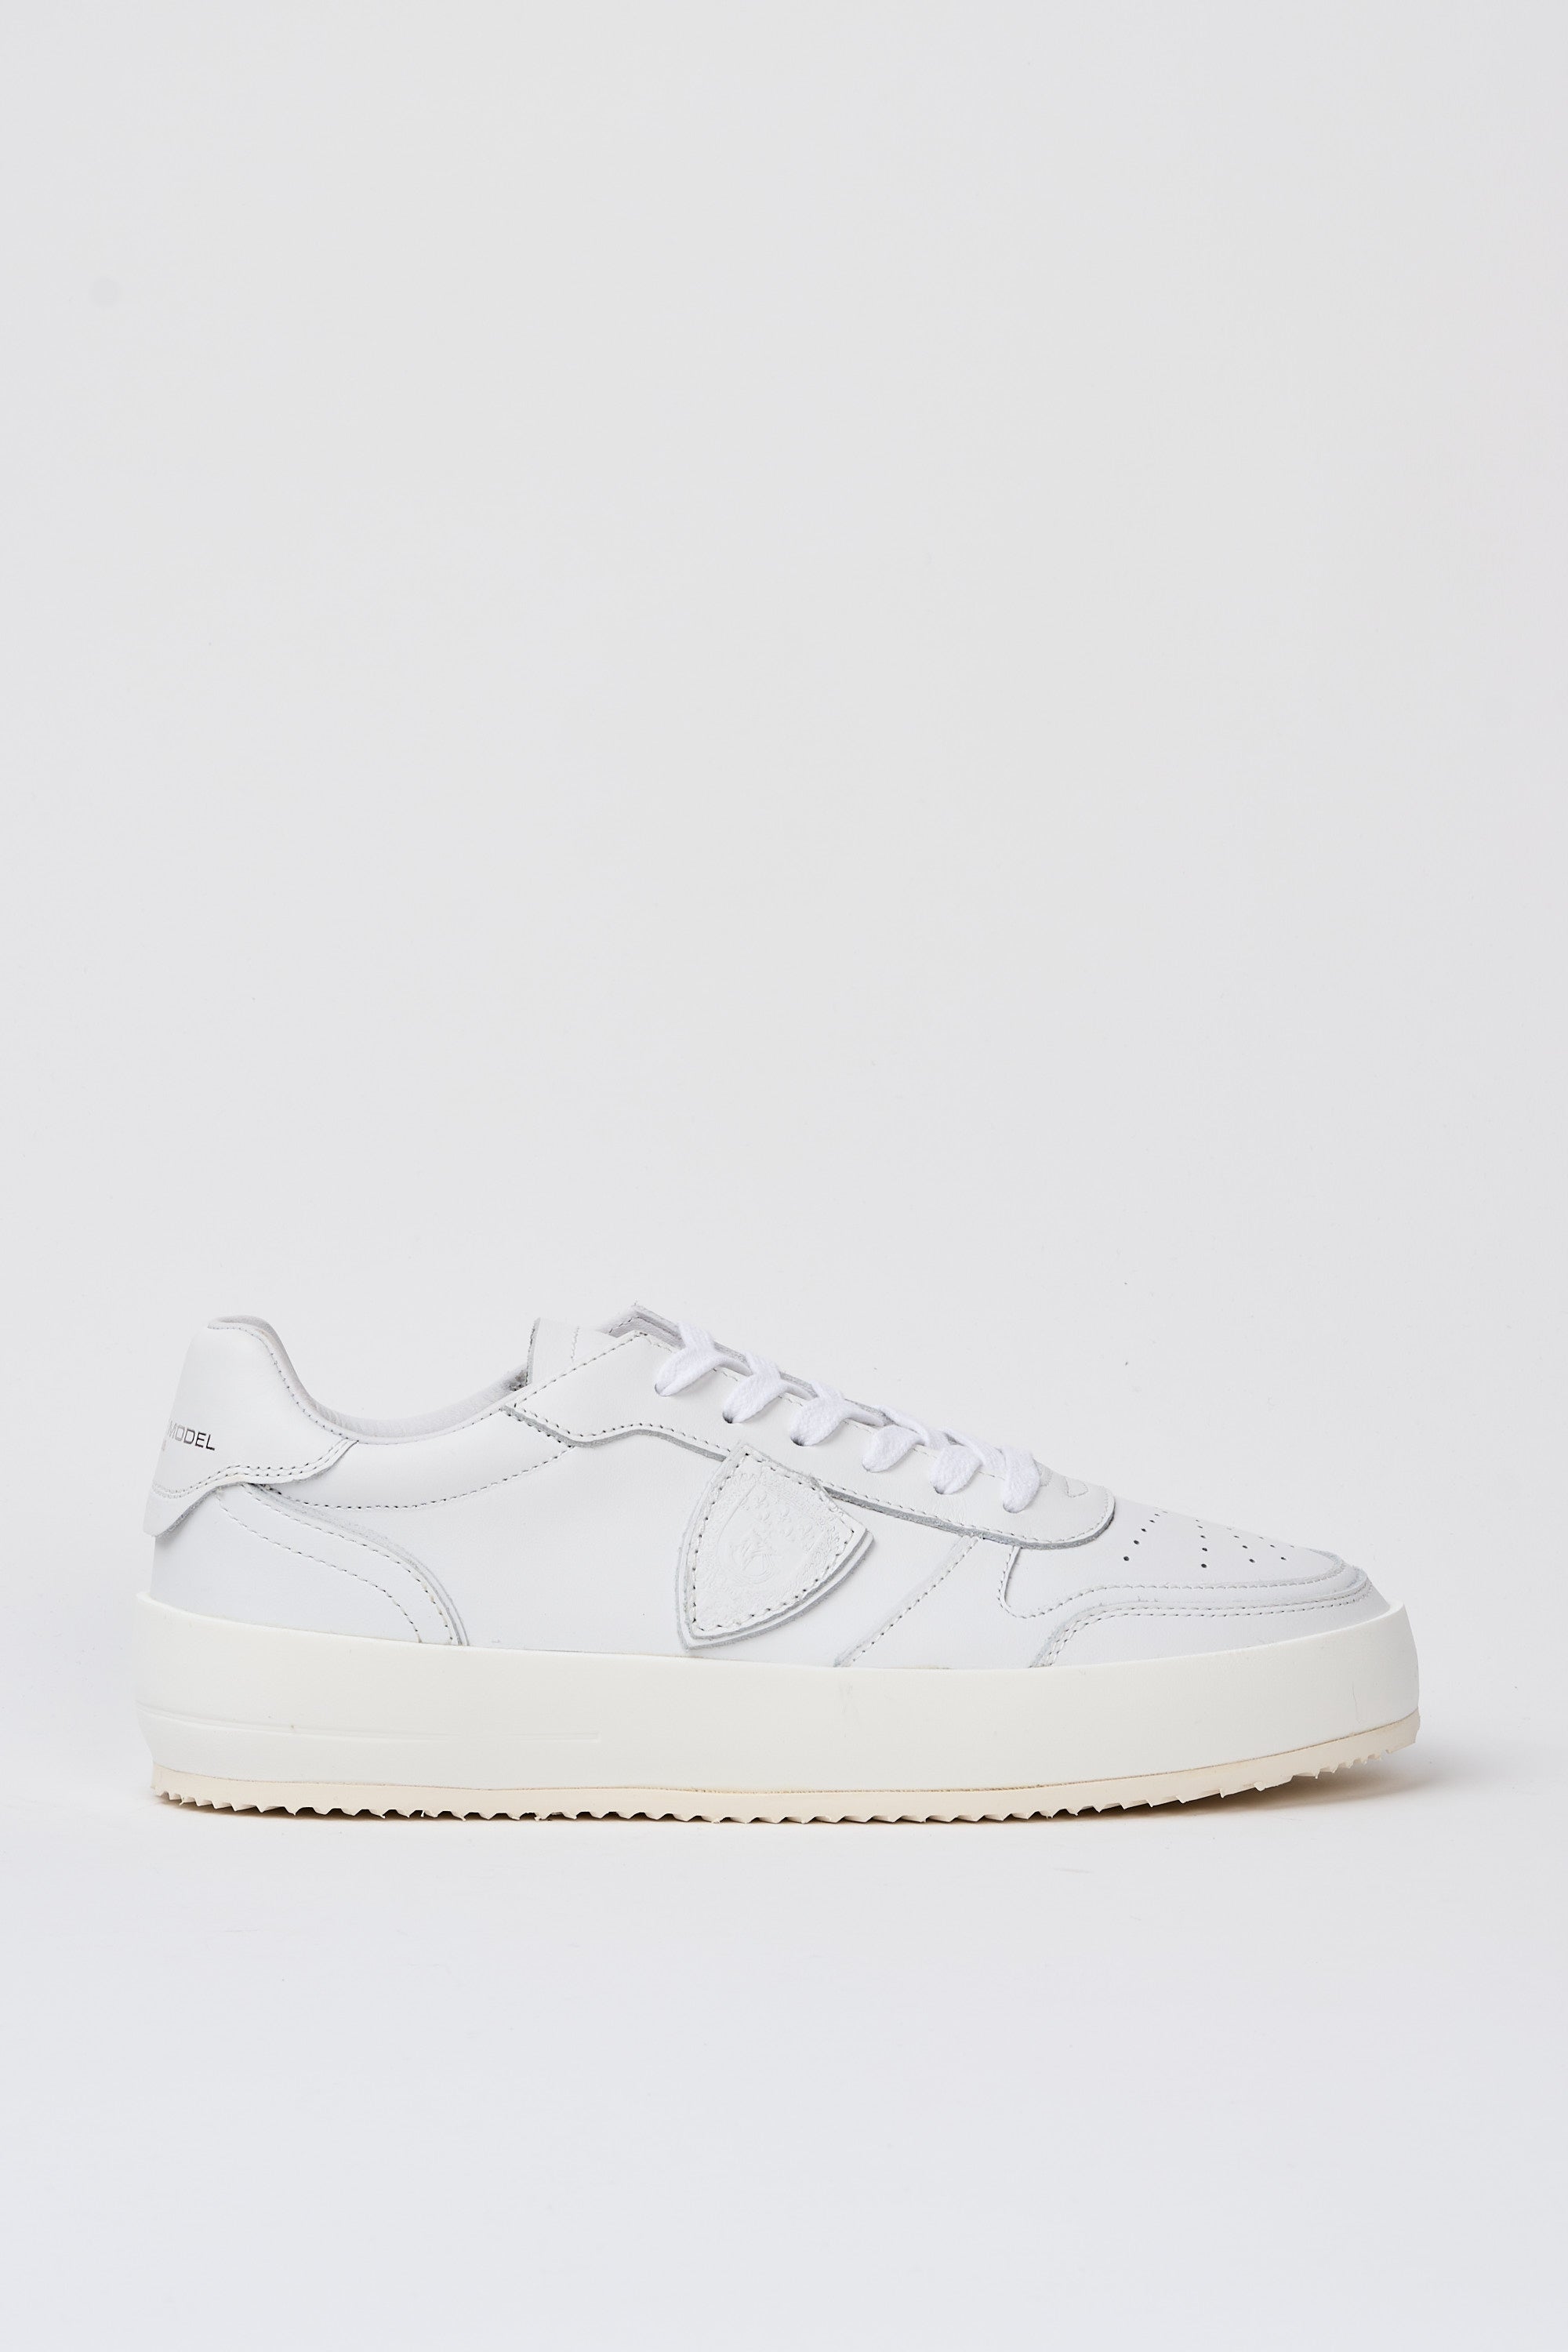 Philippe Model Sneaker Nice in Leather White-1